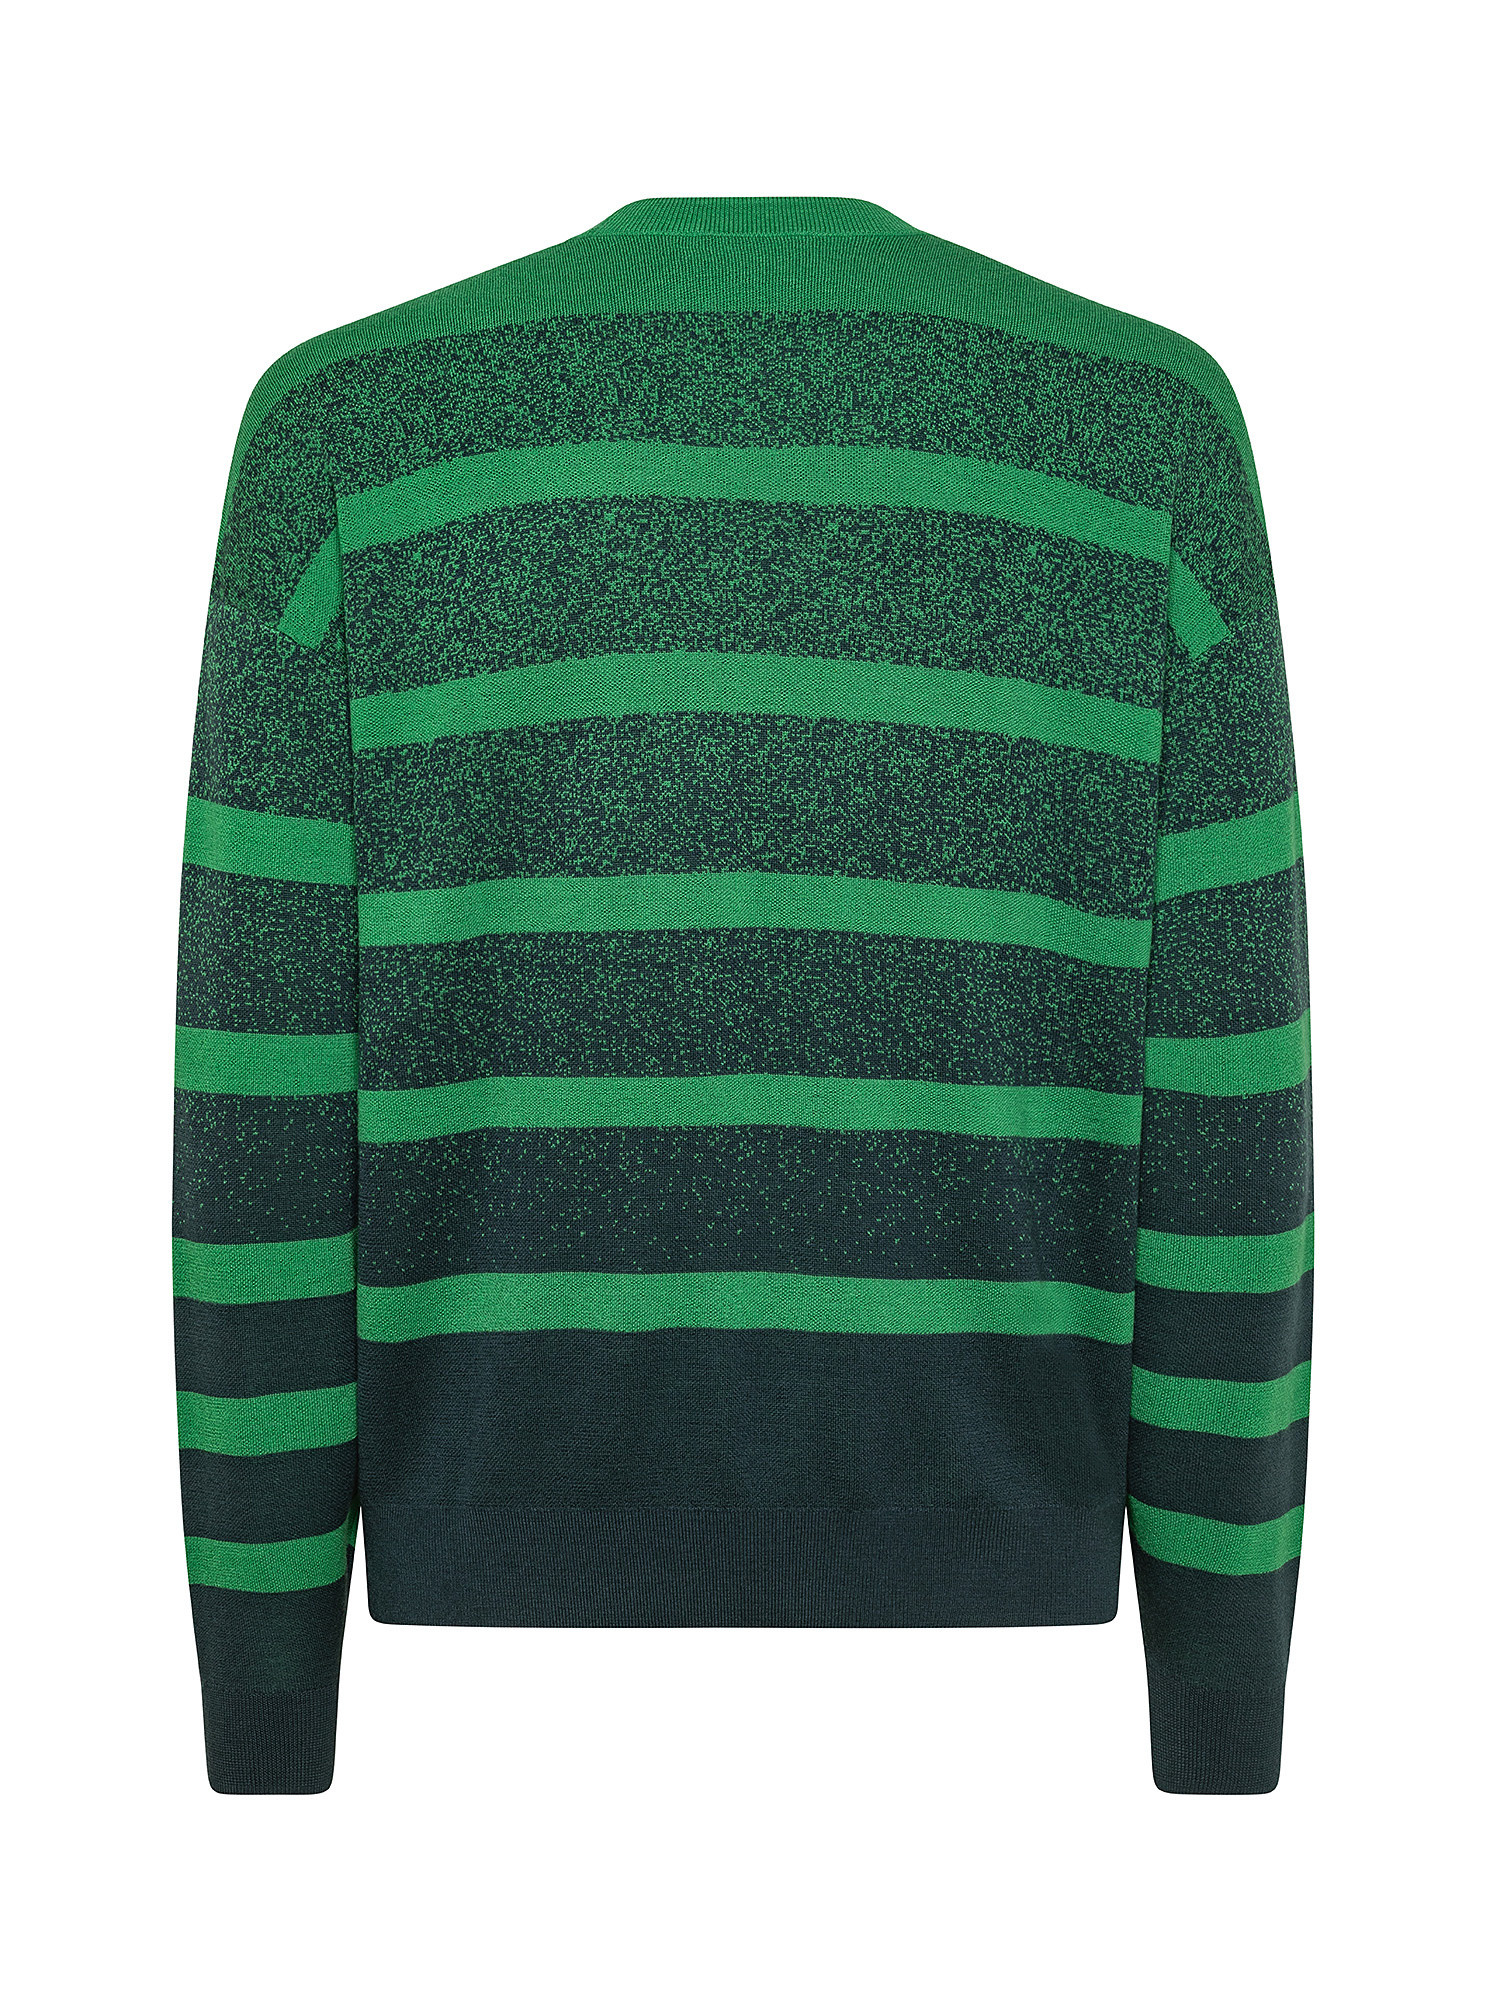 Maglione a righe con logo, Verde, large image number 1